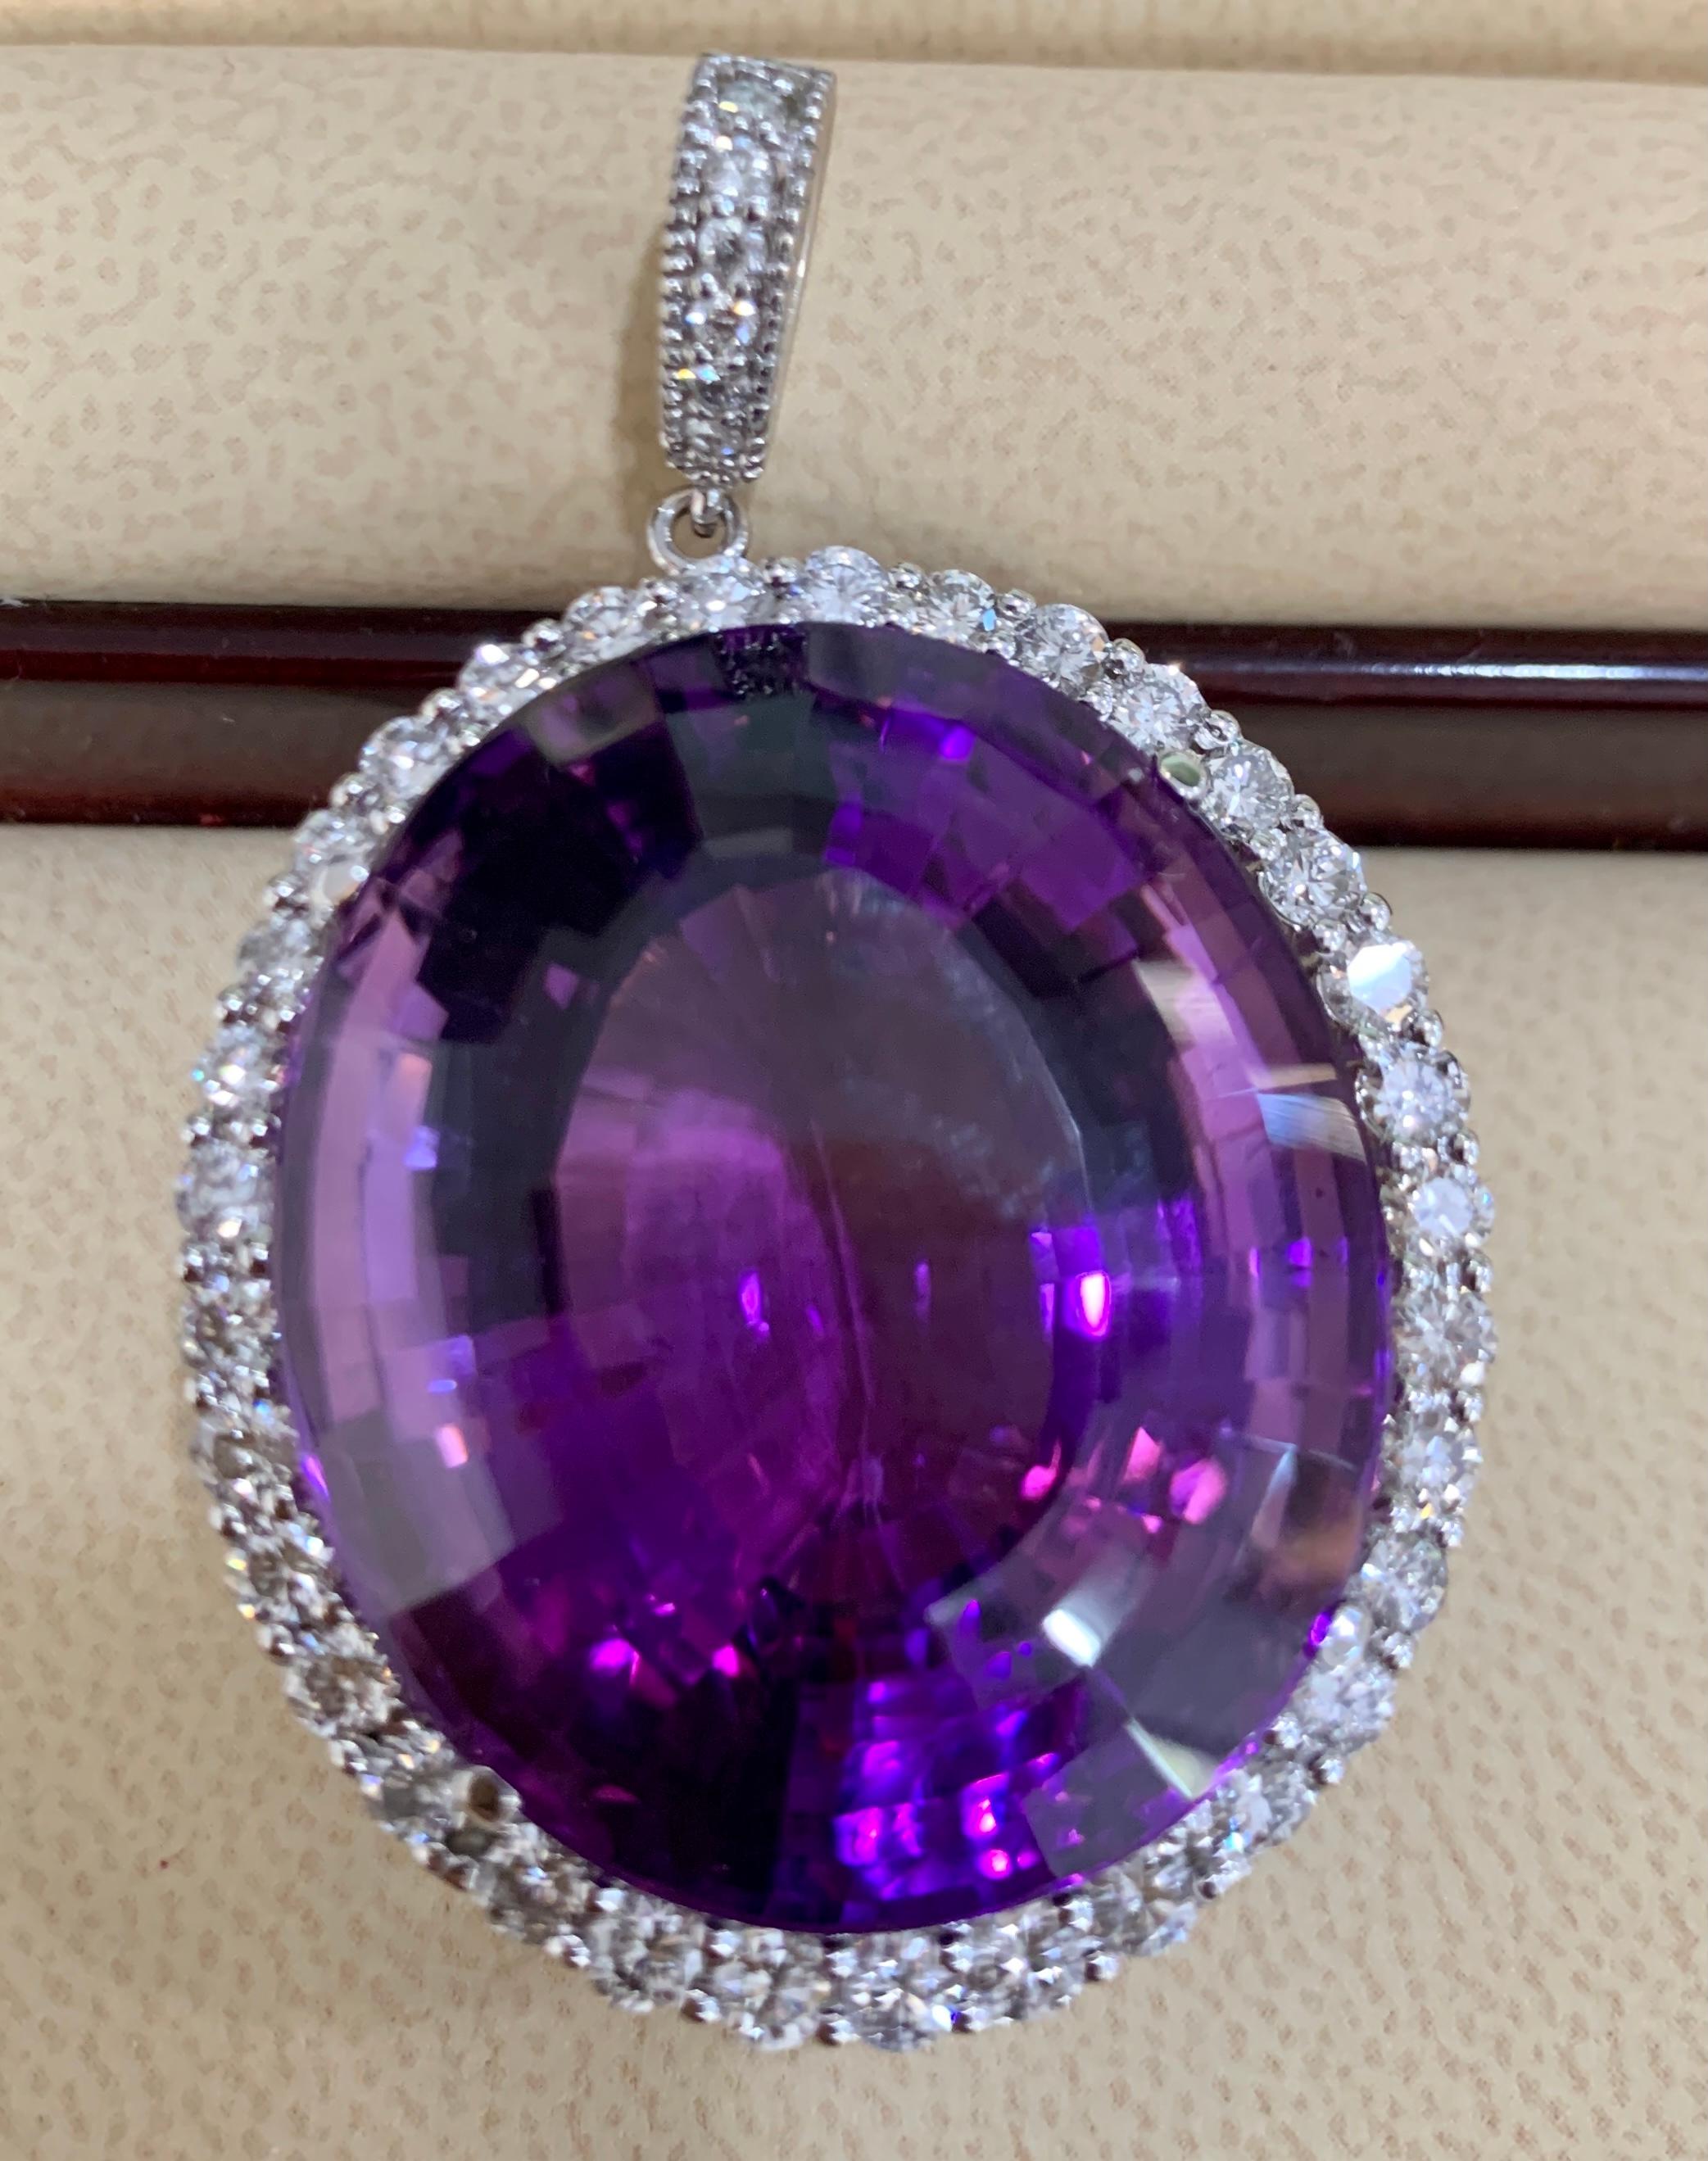 80 Carat Amethyst & 3.5 ct Diamond Pendant Necklace 14 Karat White Gold + Chain In Excellent Condition For Sale In New York, NY